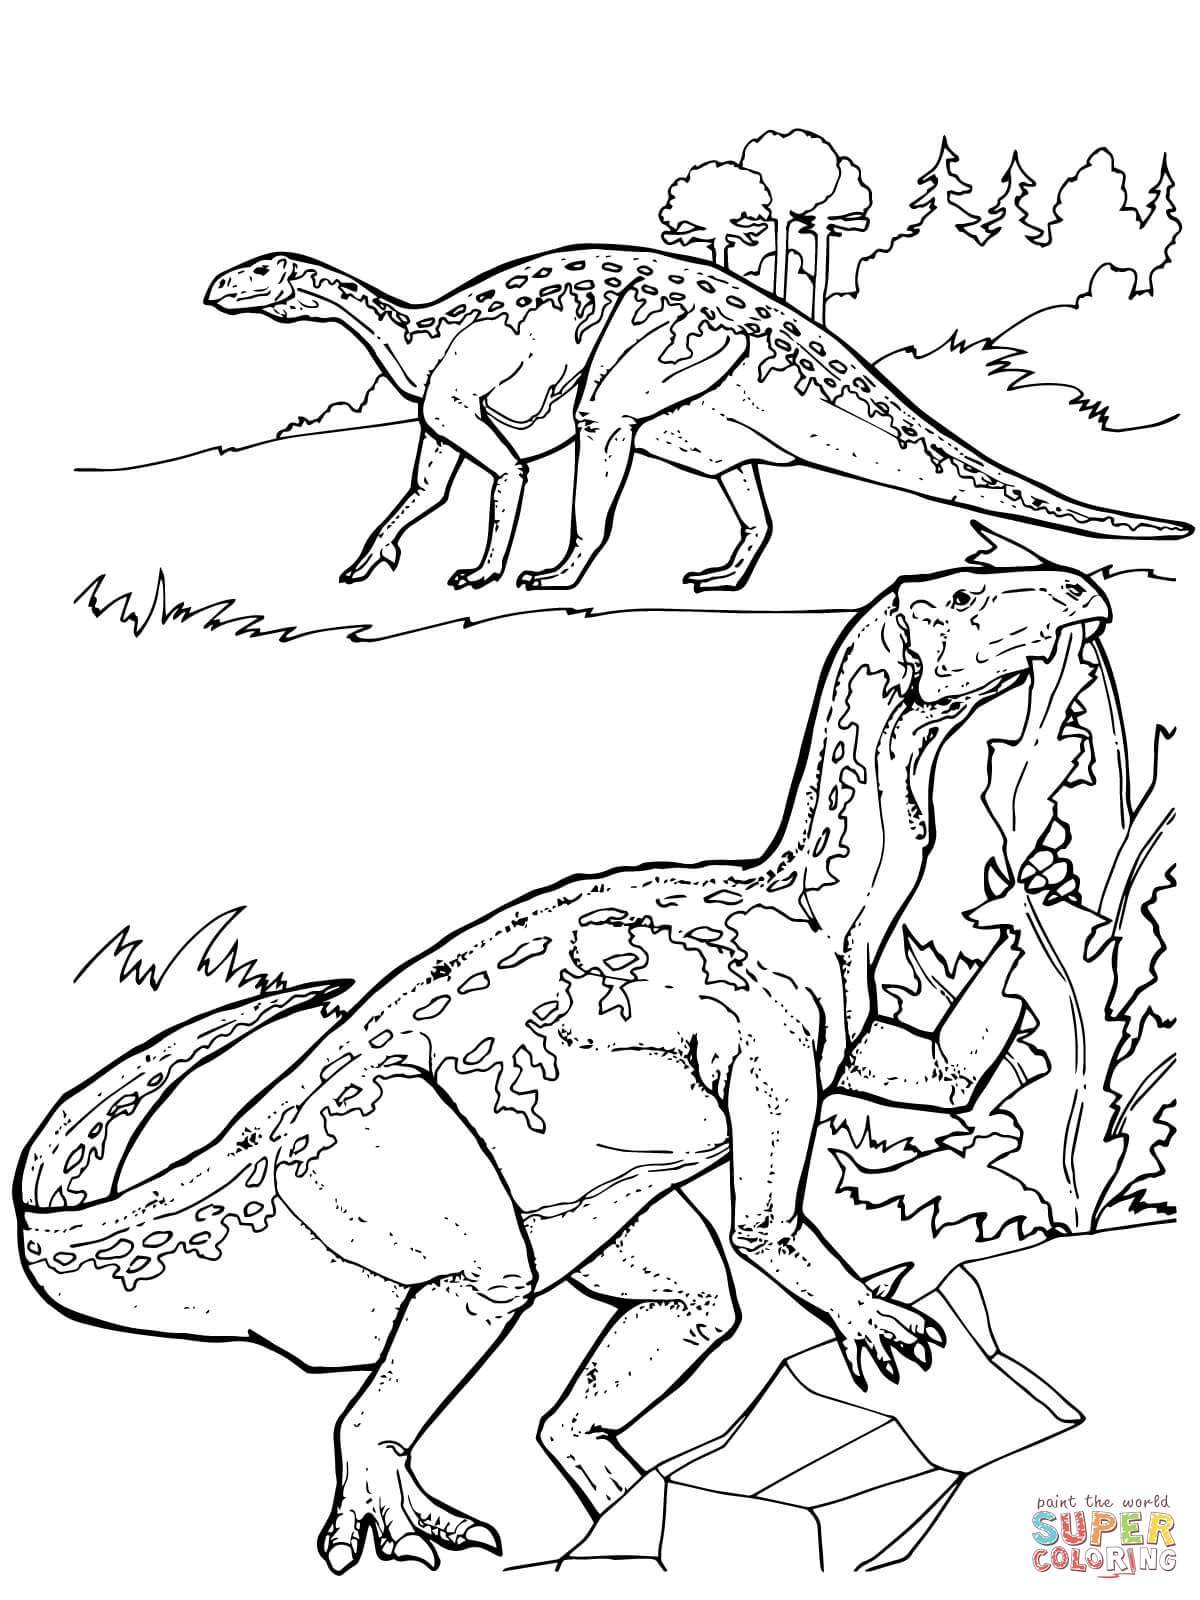 Triassic Dinosaurs Coloring Pages Wallpaper